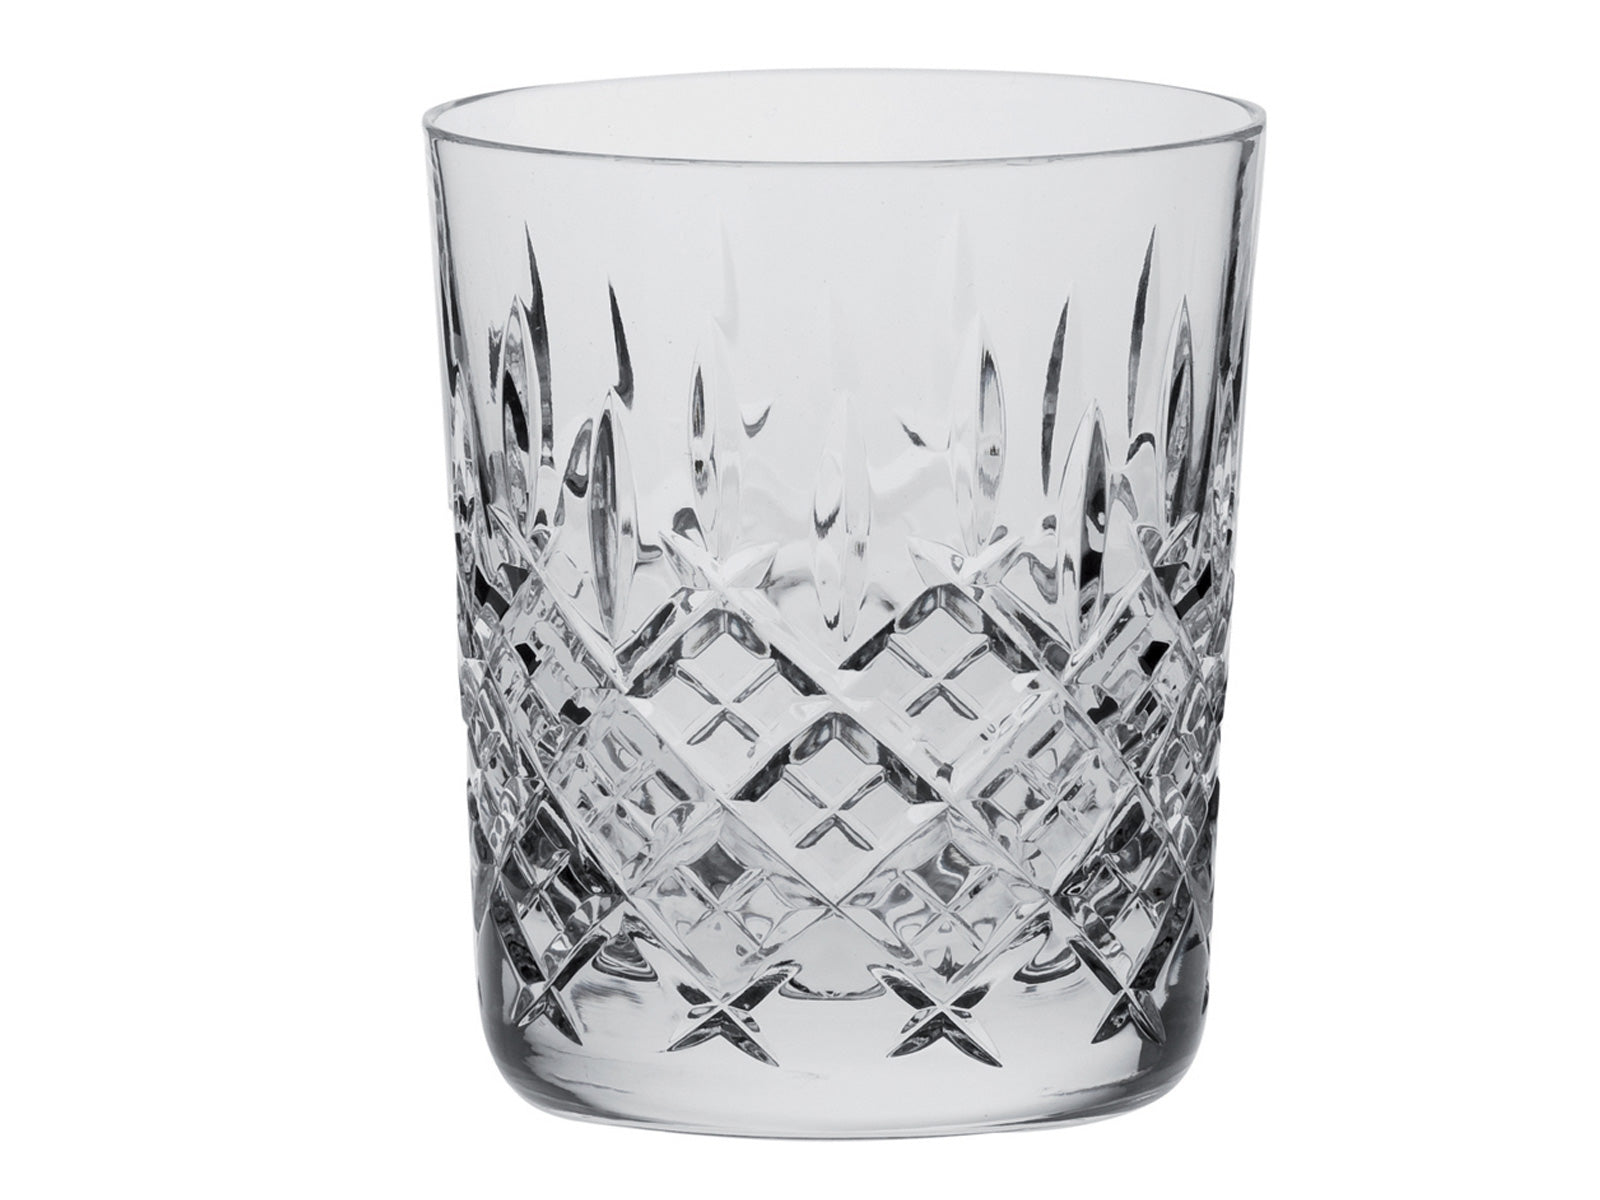 A single crystal tumbler with a cut design around the straight sides, featuring a bed of diamonds and single dashes reaching up towards the smooth rim